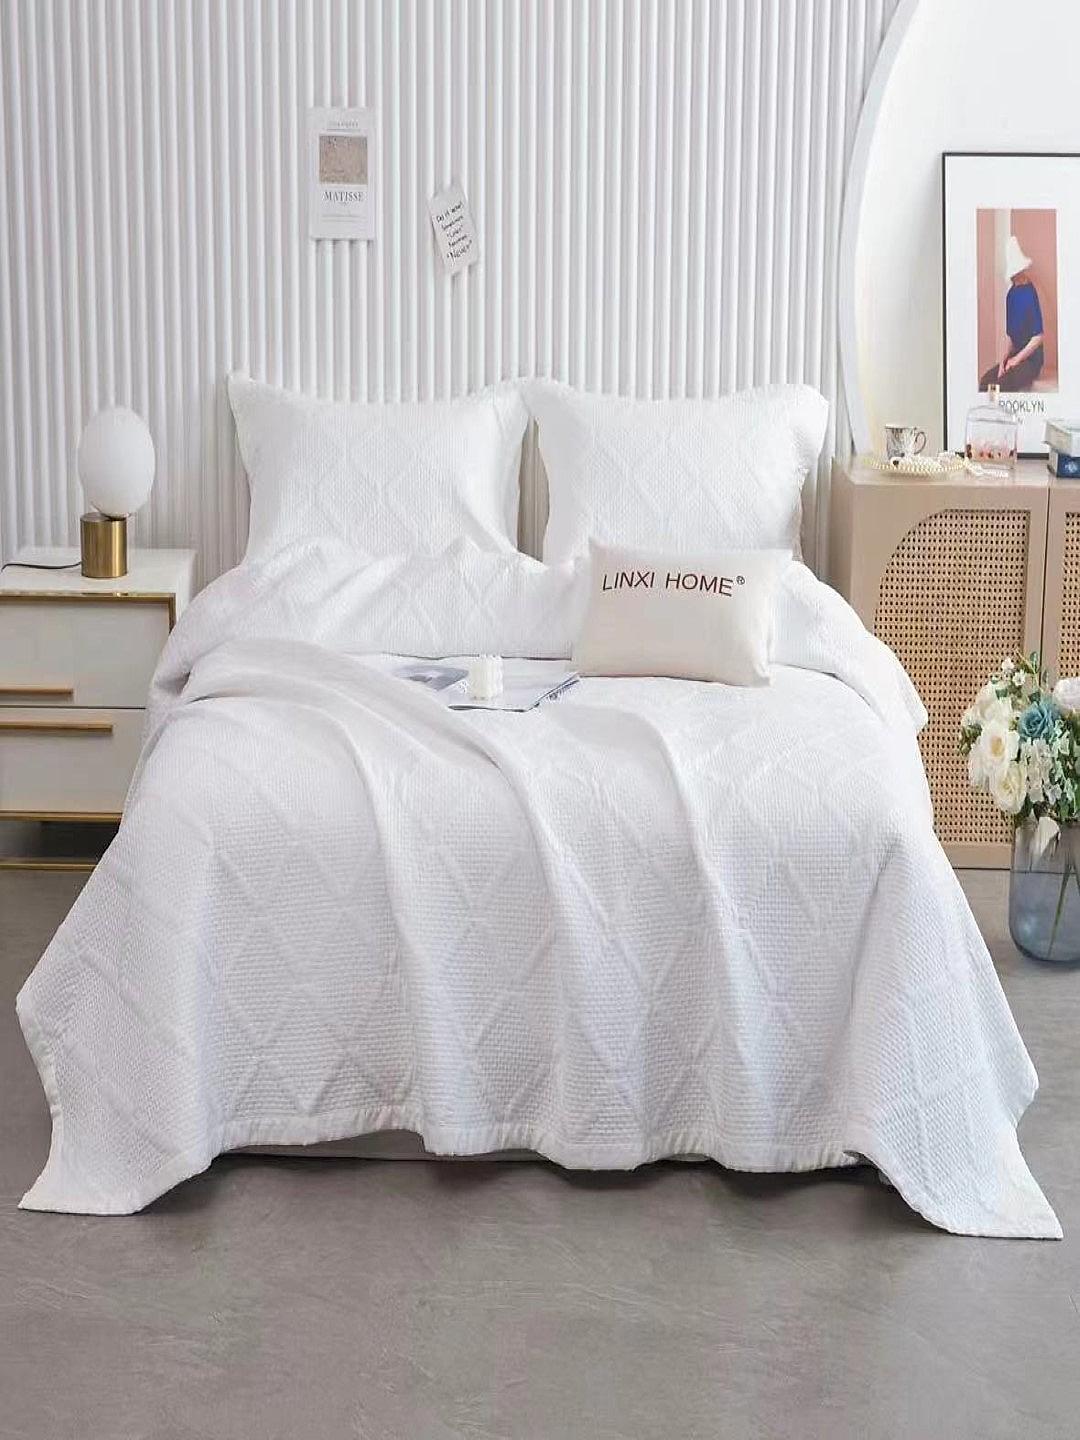 Desenhista Solace Bedcover 100% Cotton Fabric 3Pc Set Available in a Variety of Soothing Colors and Charming Patterns